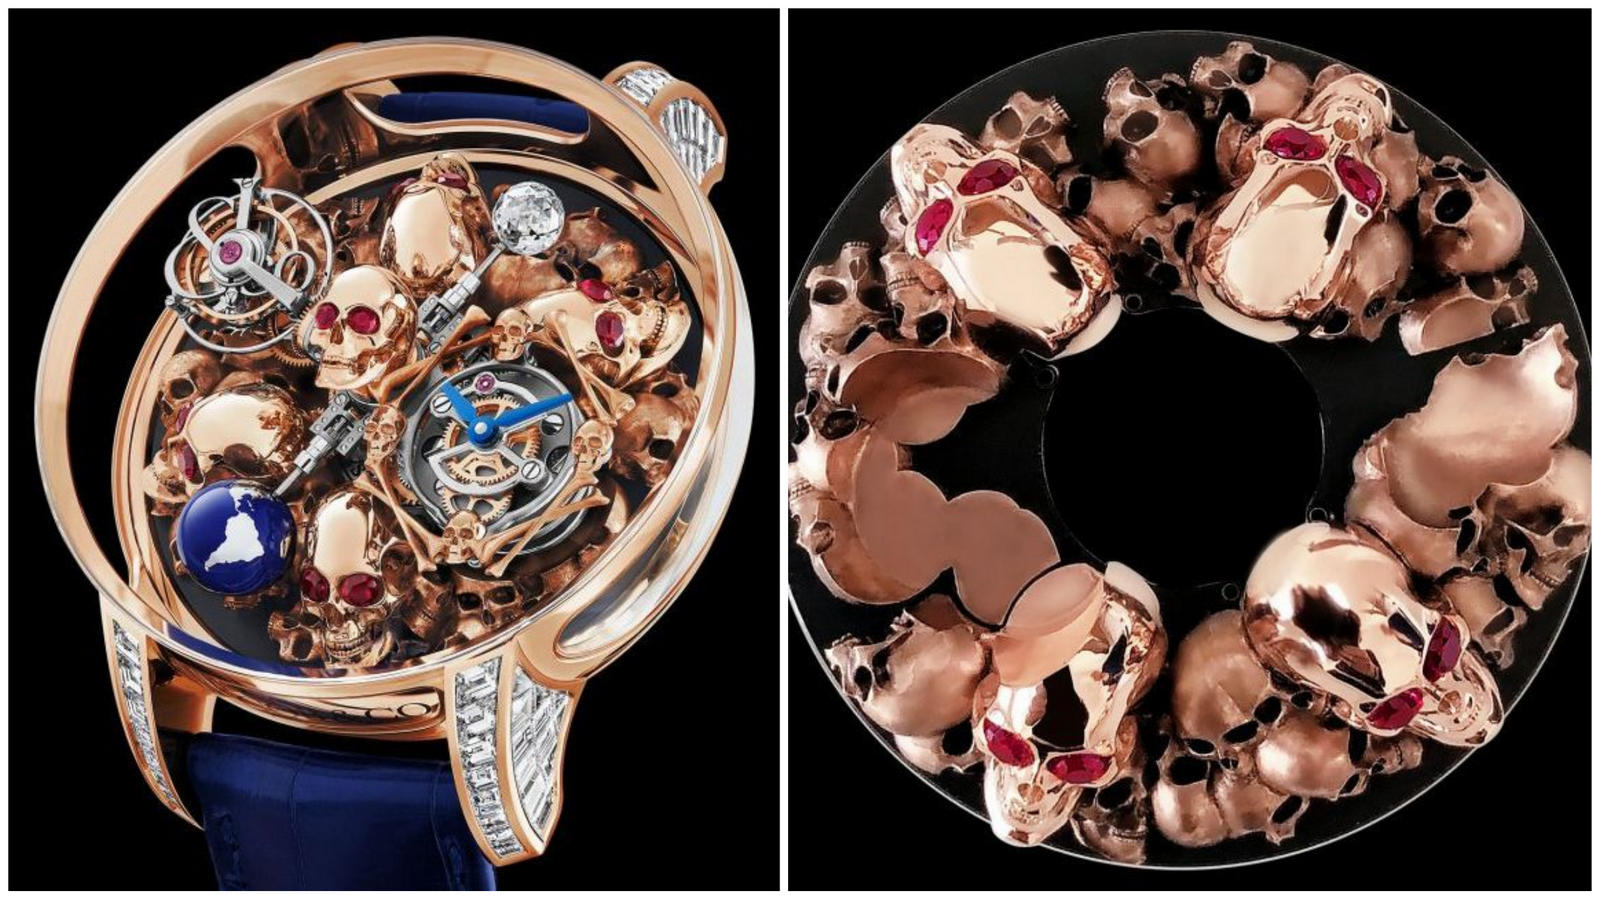 The new $800,000 Jacob & Co. Astronomia 4 Skulls timepiece has a stunning dial decorated with 18K rose gold skulls